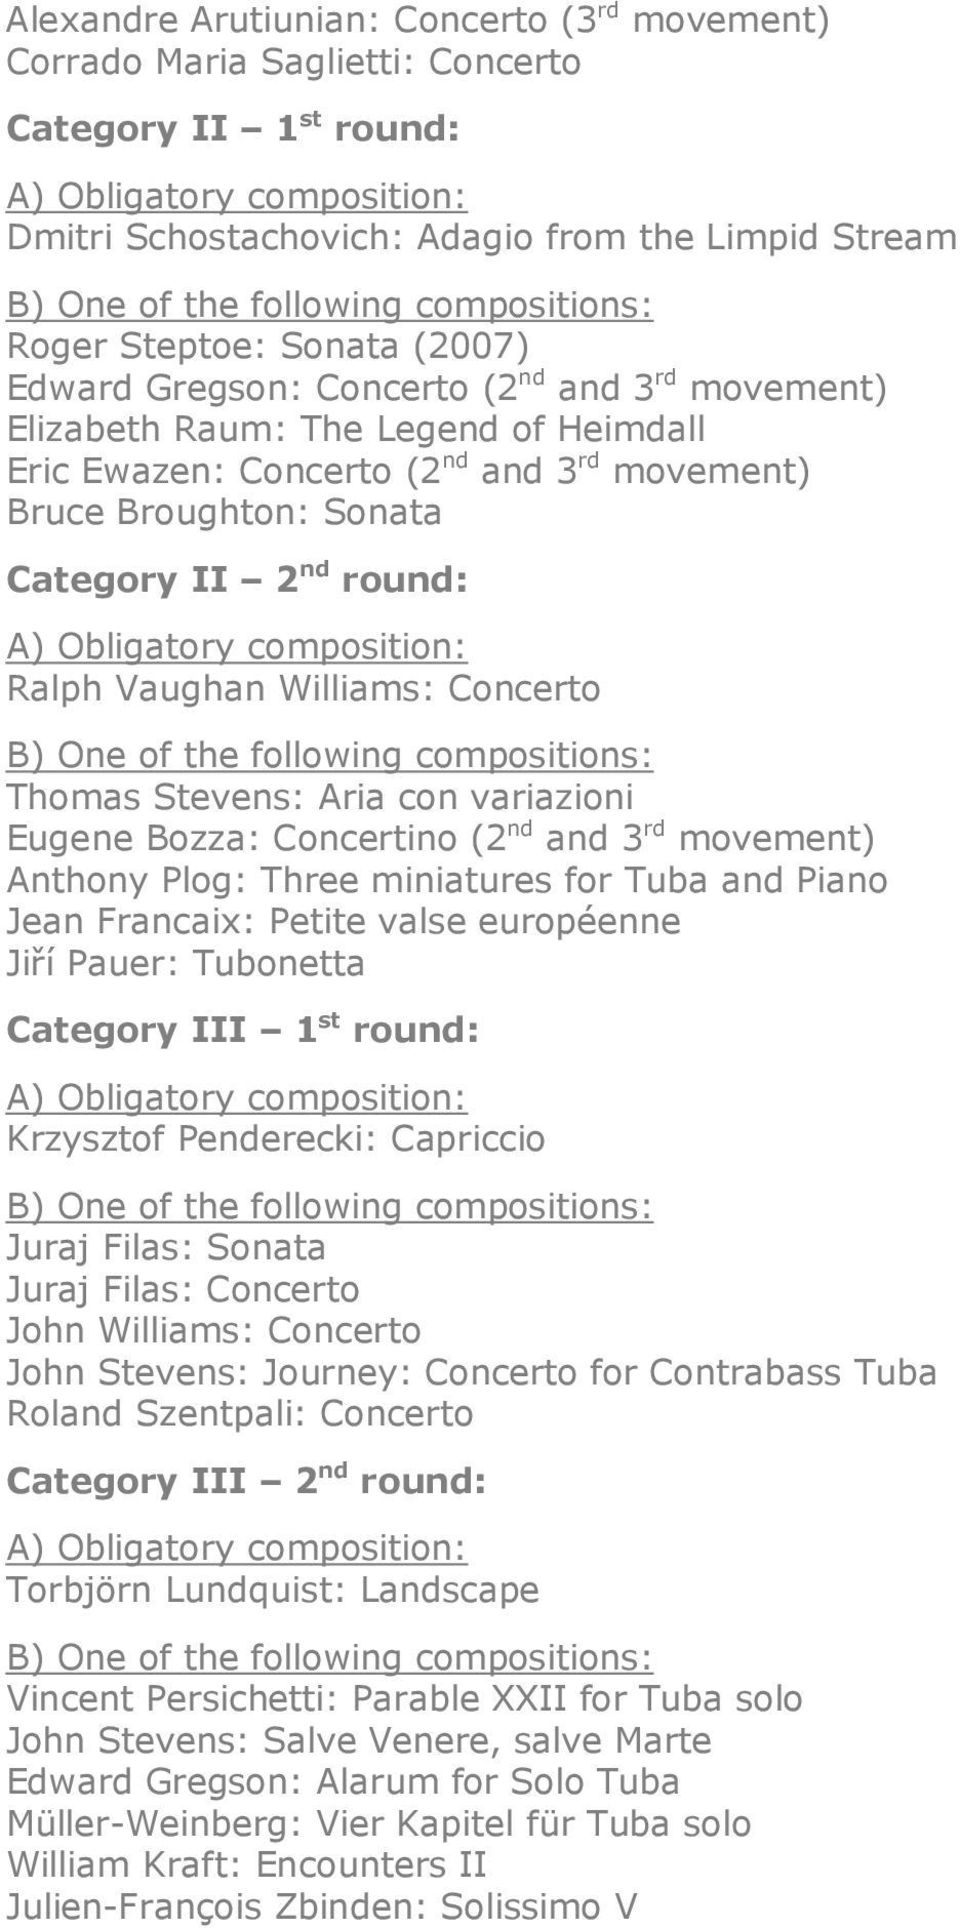 A) Obligatory composition: Ralph Vaughan Williams: Concerto Thomas Stevens: Aria con variazioni Eugene Bozza: Concertino (2 nd and 3 rd movement) Anthony Plog: Three miniatures for Tuba and Piano